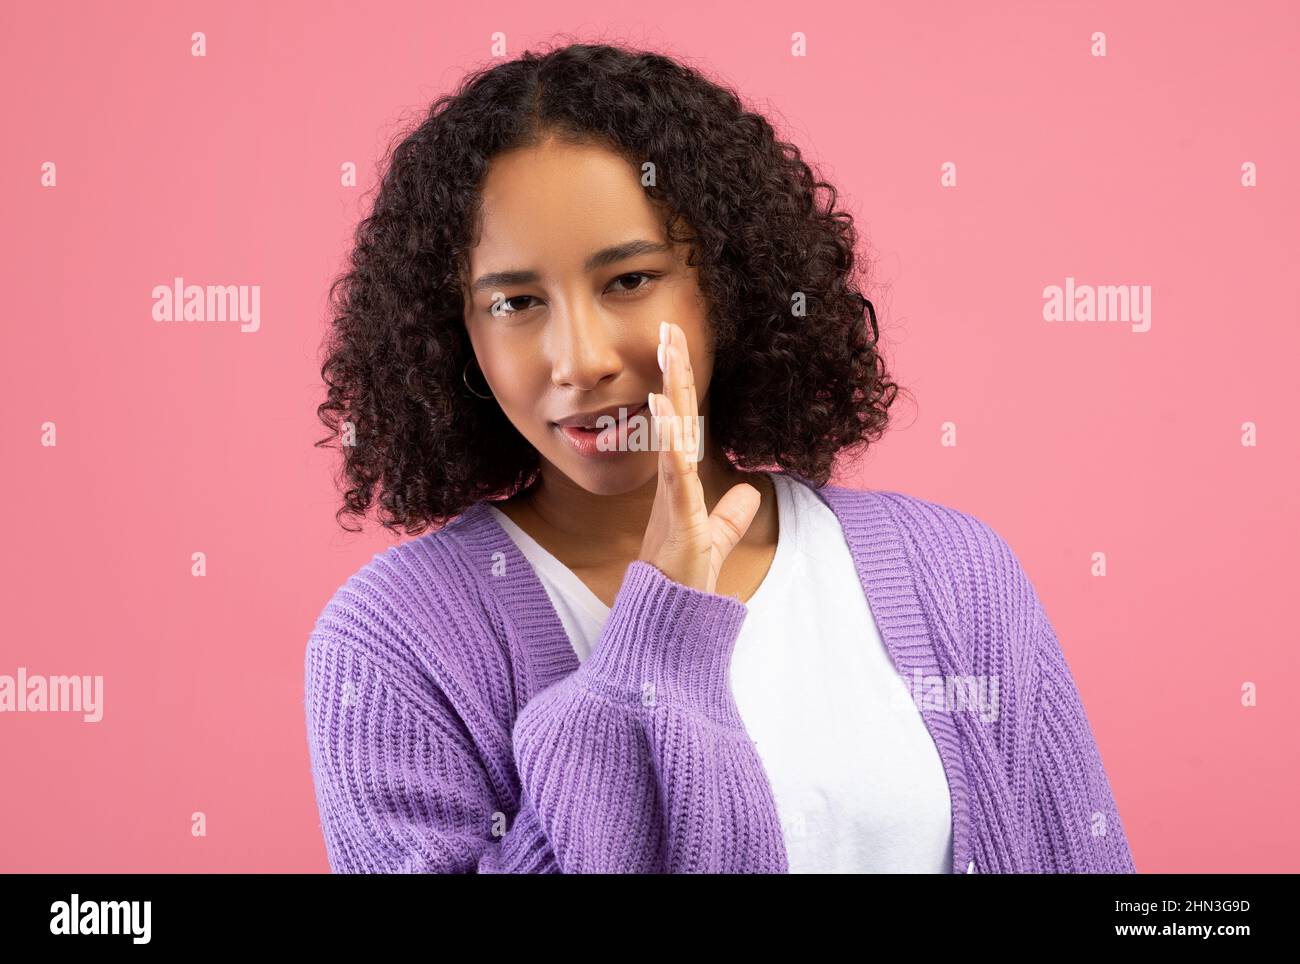 Young black woman whispering secret, sharing confidential information, spreading gossip on pink studio background Stock Photo